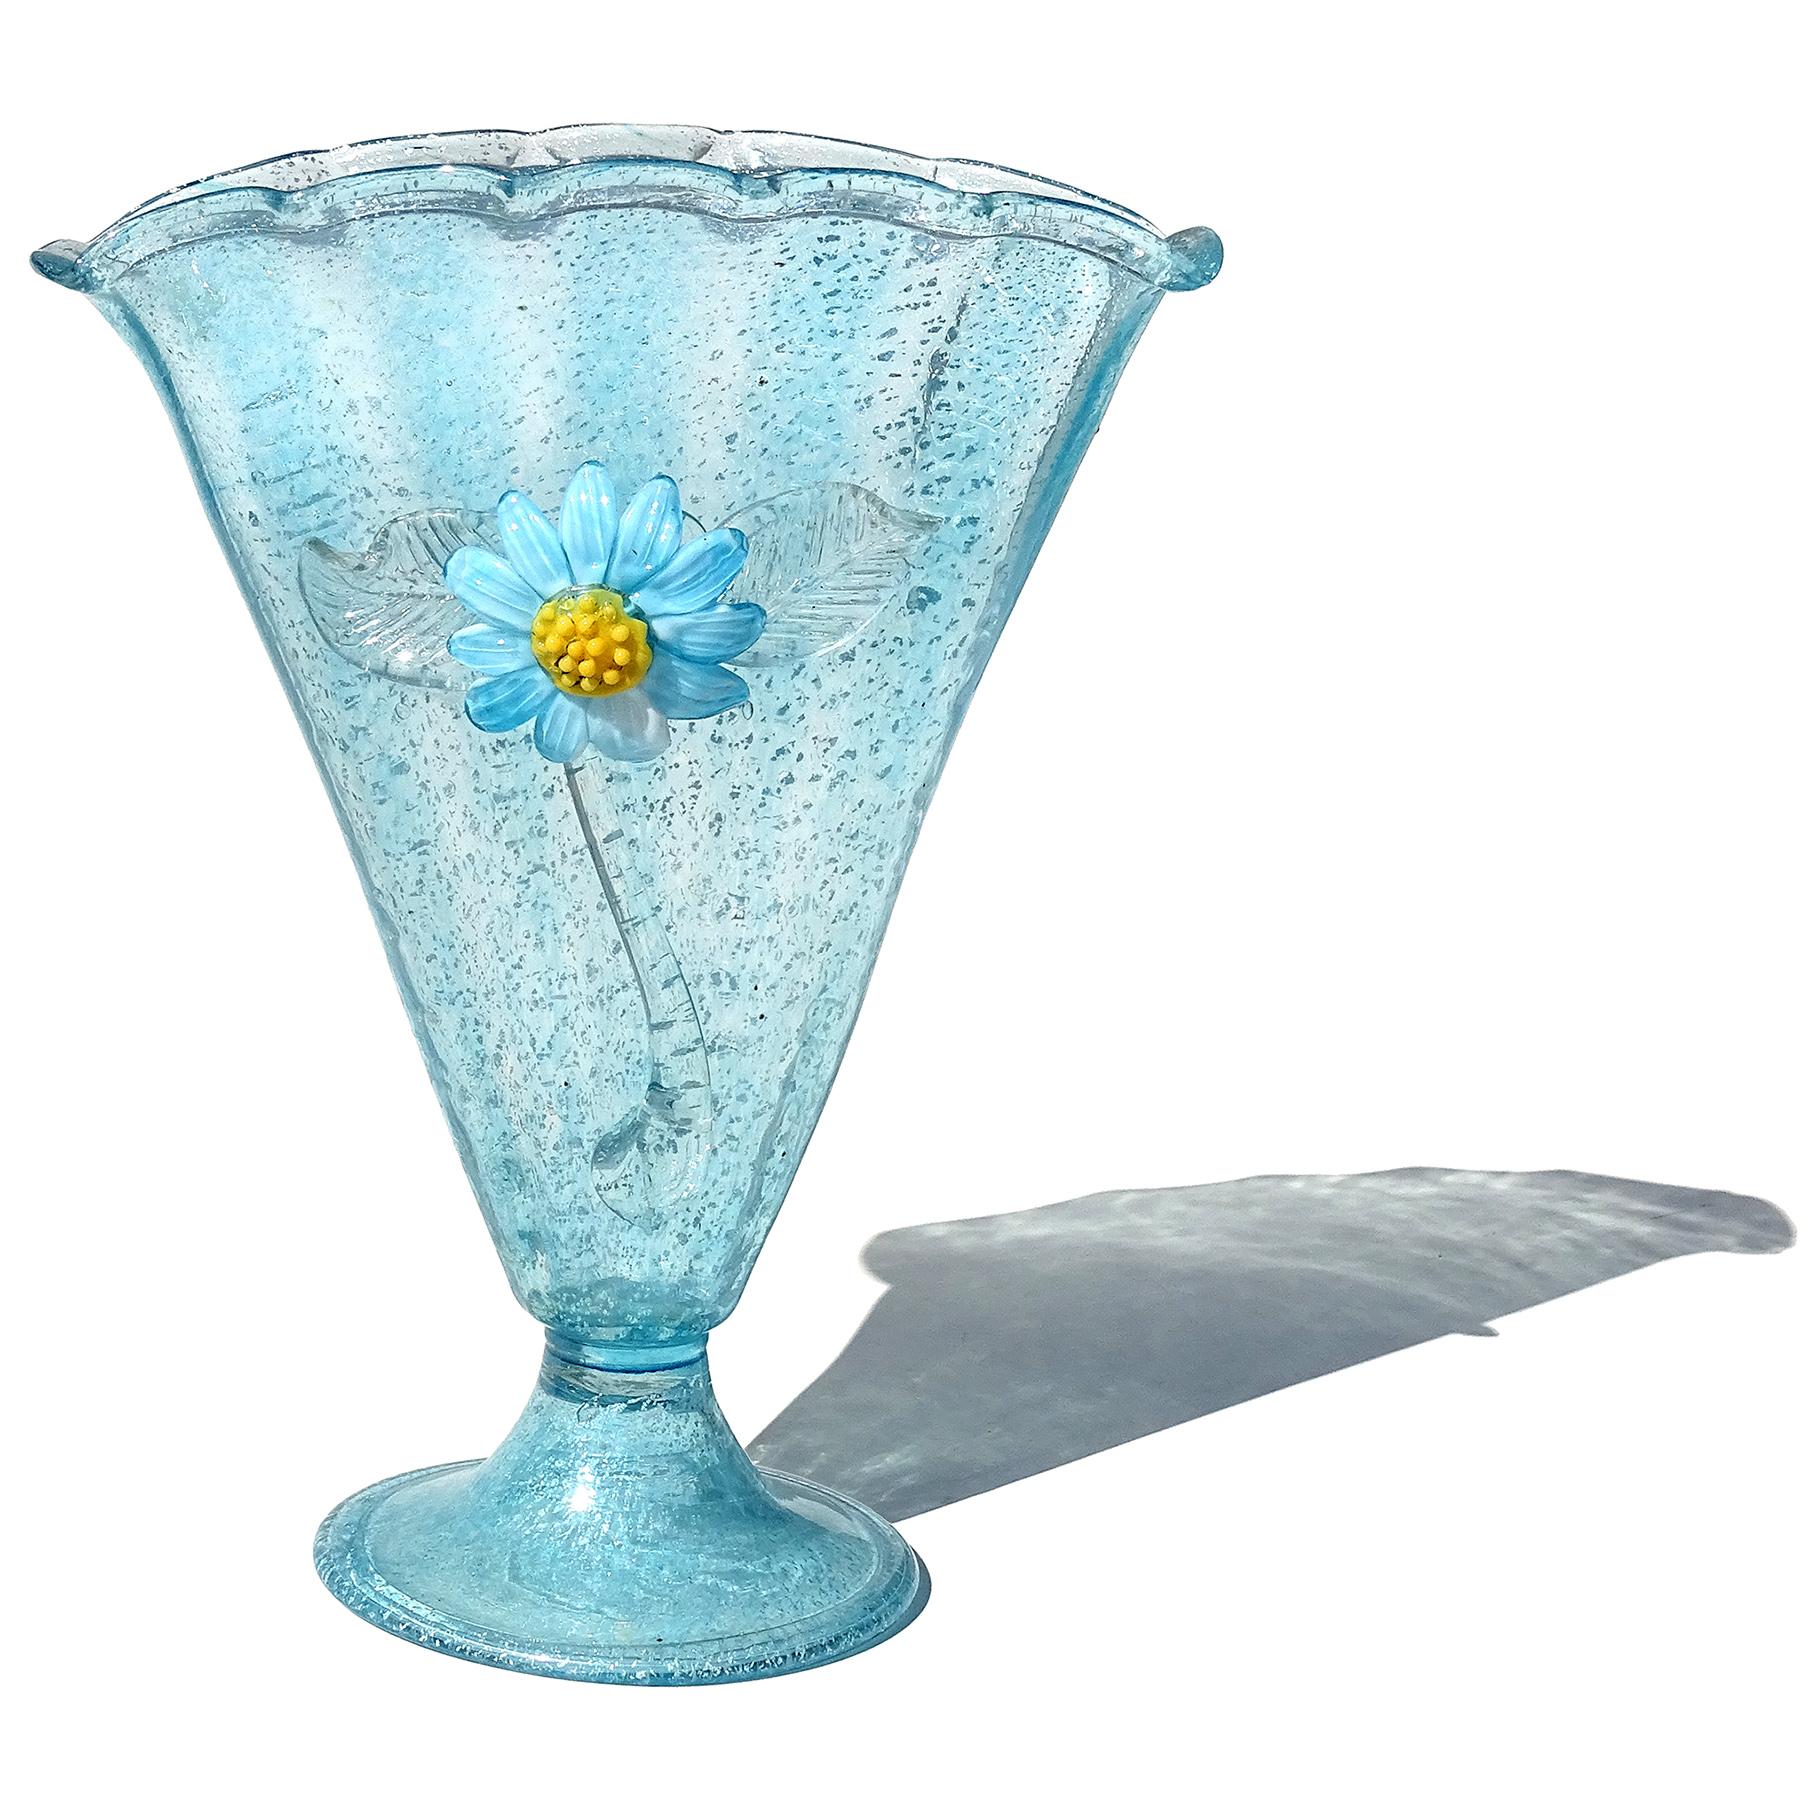 Beautiful antique, early Murano hand blown blue and silver flecks Italian art glass fan shaped footed vase. Attributed to the Fratelli Toso company, with a similar vase pictured in the company book. The vase is profusely covered in silver leaf, and